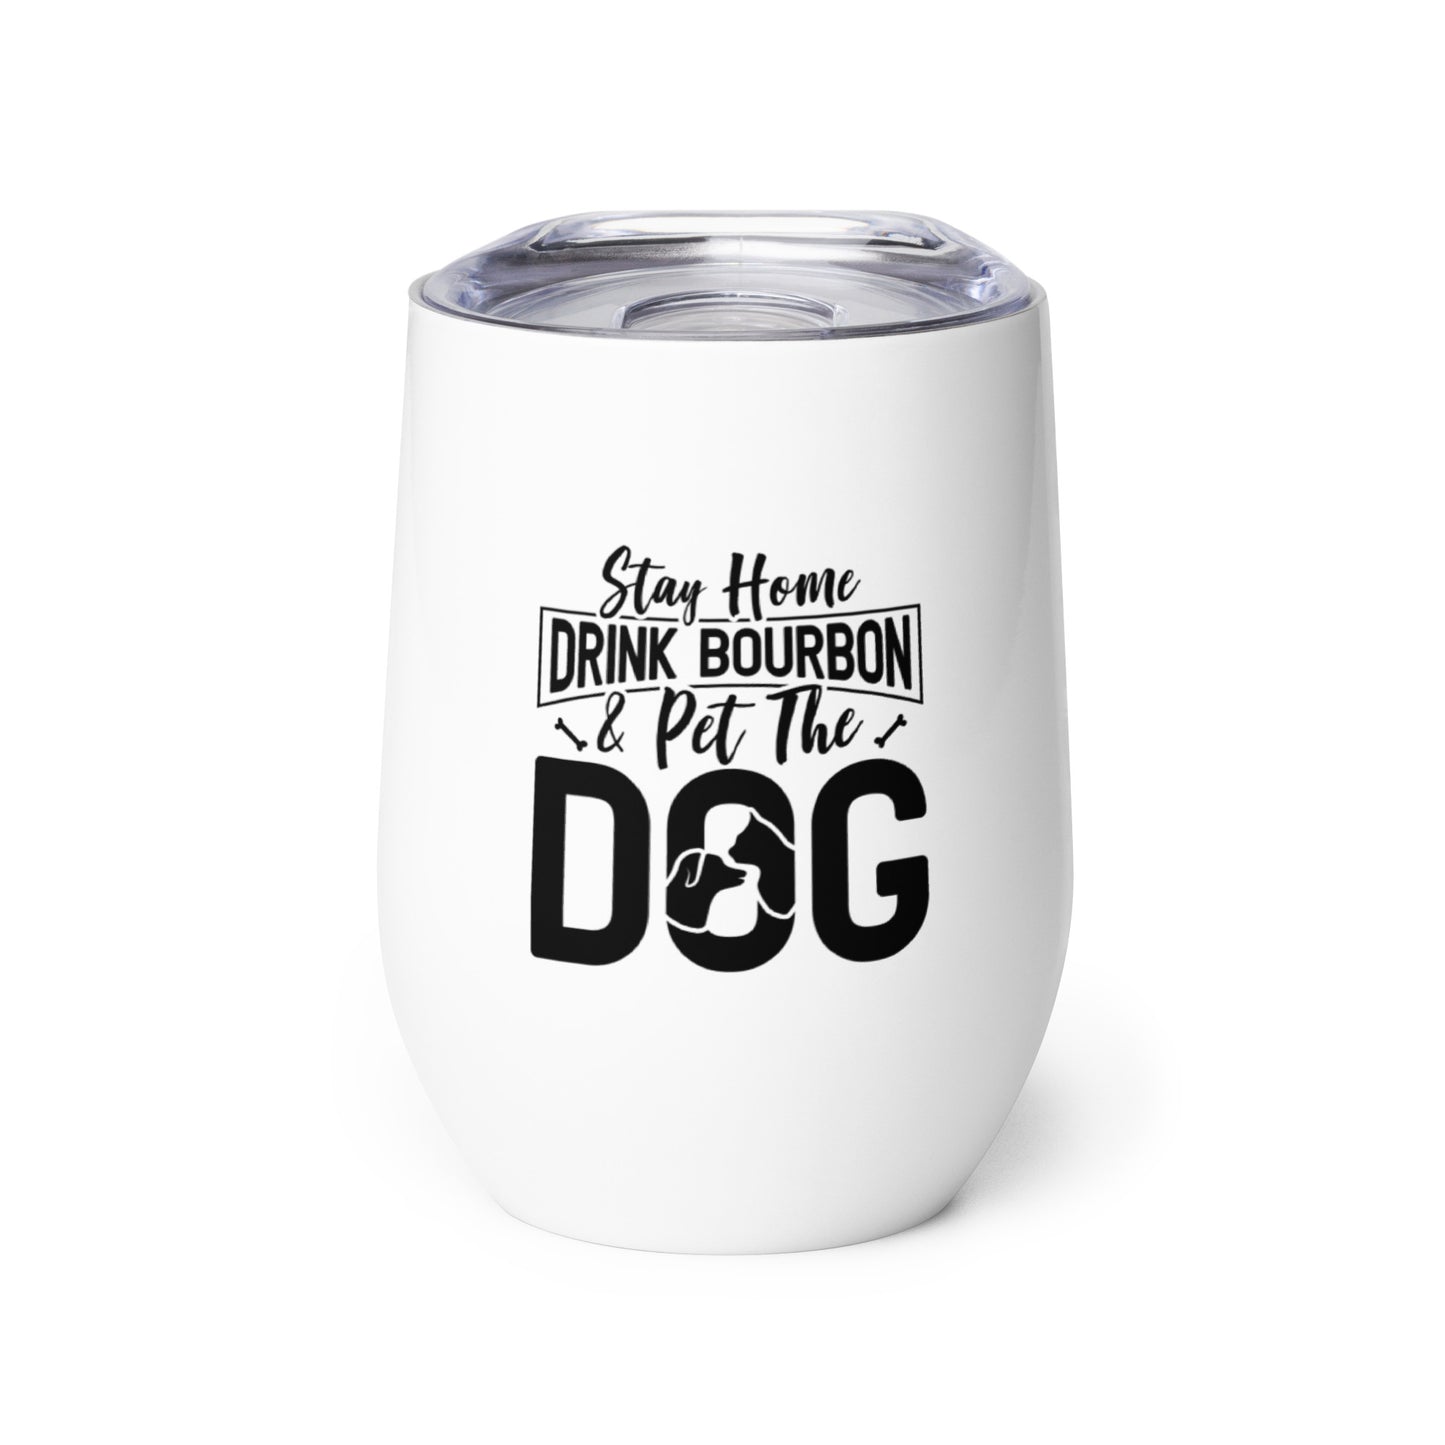 Stay Home Drink Bourbon Pet the Dog Wine tumbler